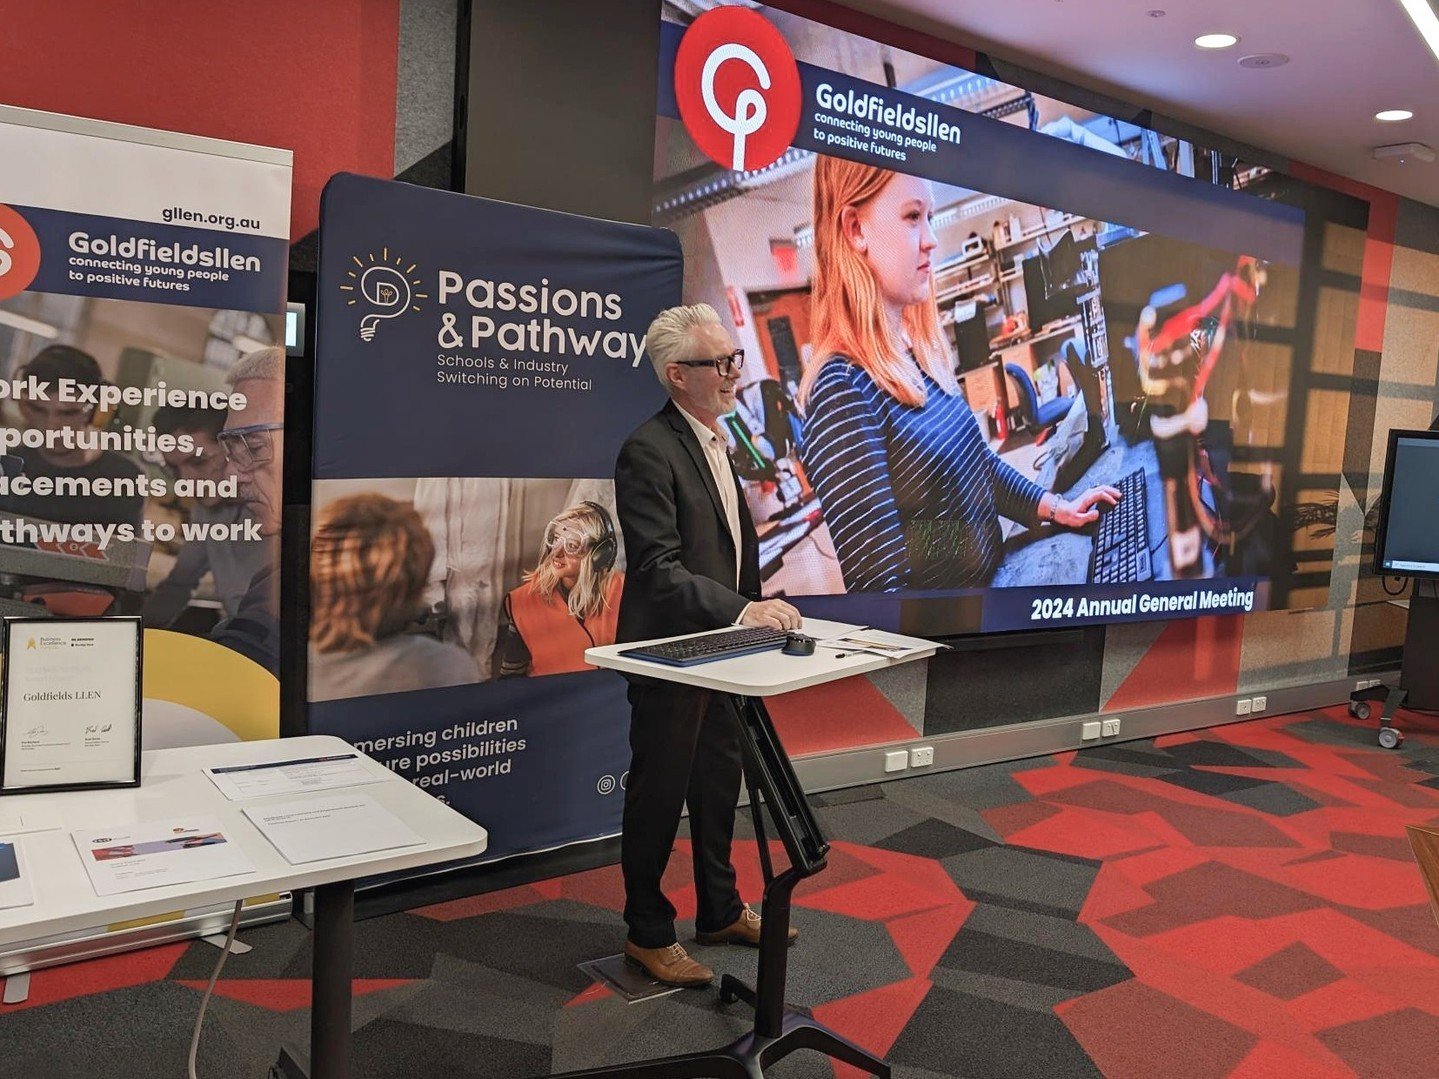 Last night our partners joined us to celebrate our collective impact at the Goldfields LLEN 2024 Annual General Meeting. The event was hosted by the Bendigo Tech School with 30+ attendees, including new and outgoing Committee Members, staff, partners